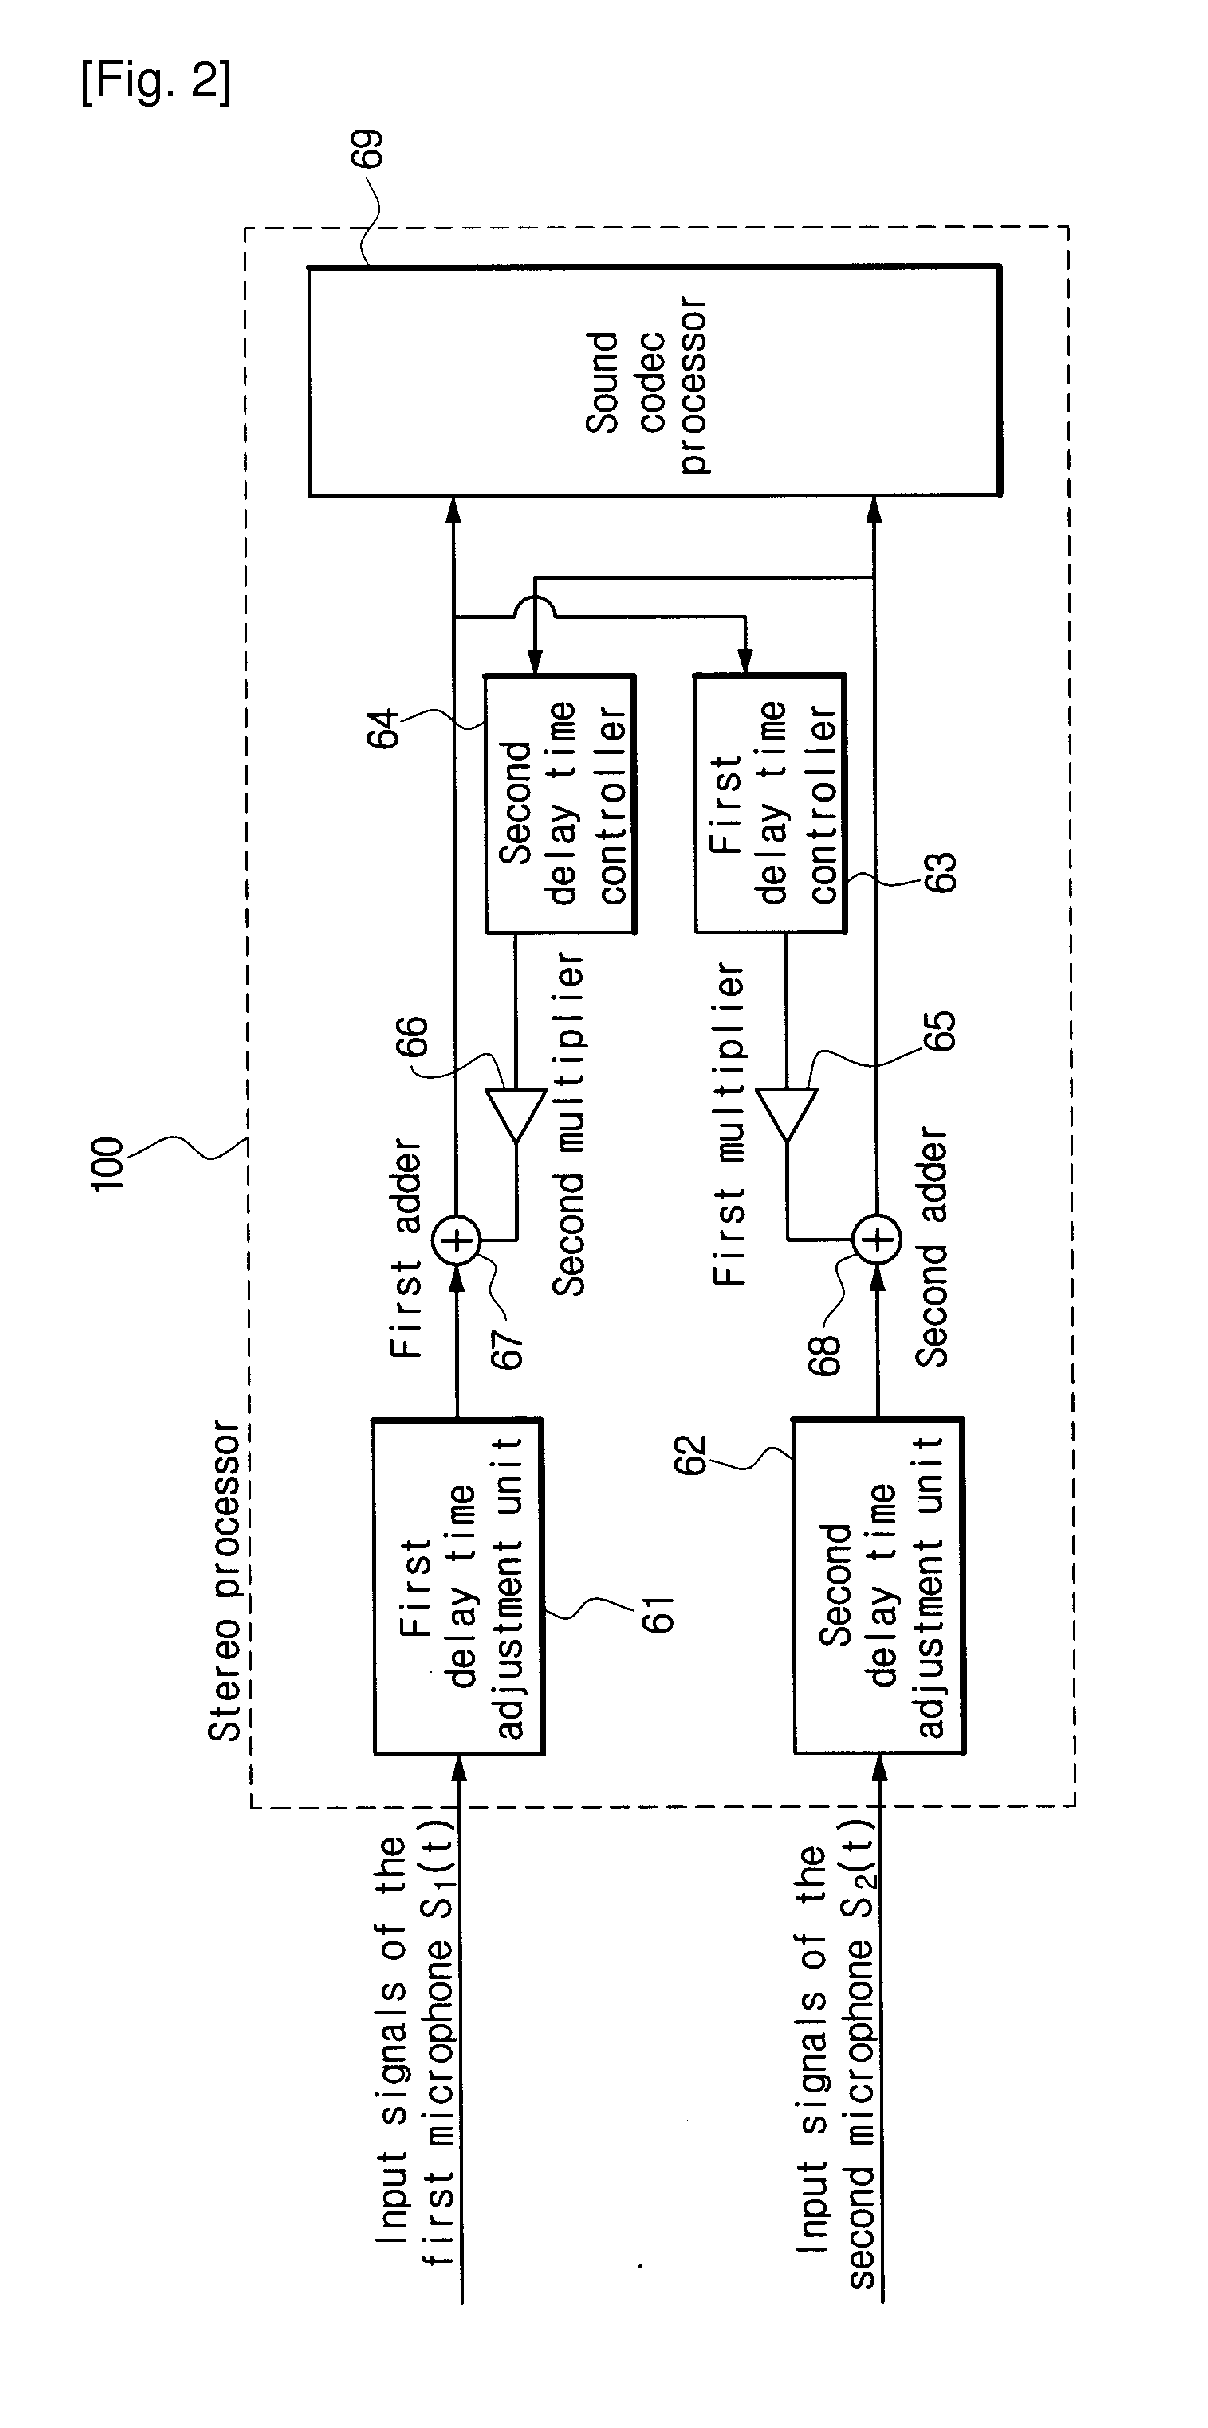 Apparatus and method for voice processing in mobile communication terminal